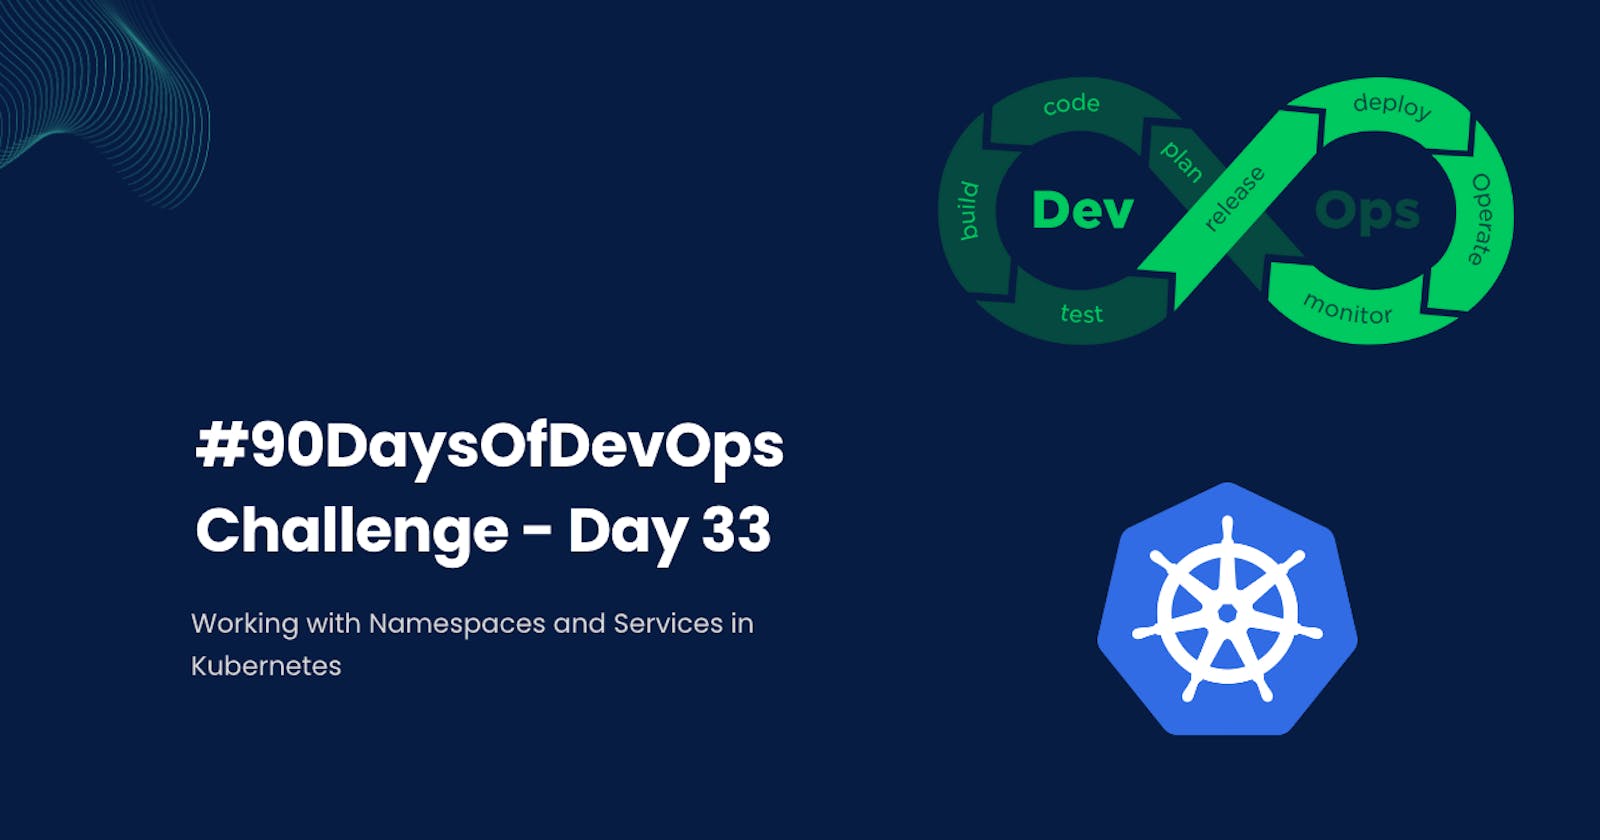 #90DaysOfDevOps Challenge - Day 33 - Working with Namespaces and Services in Kubernetes